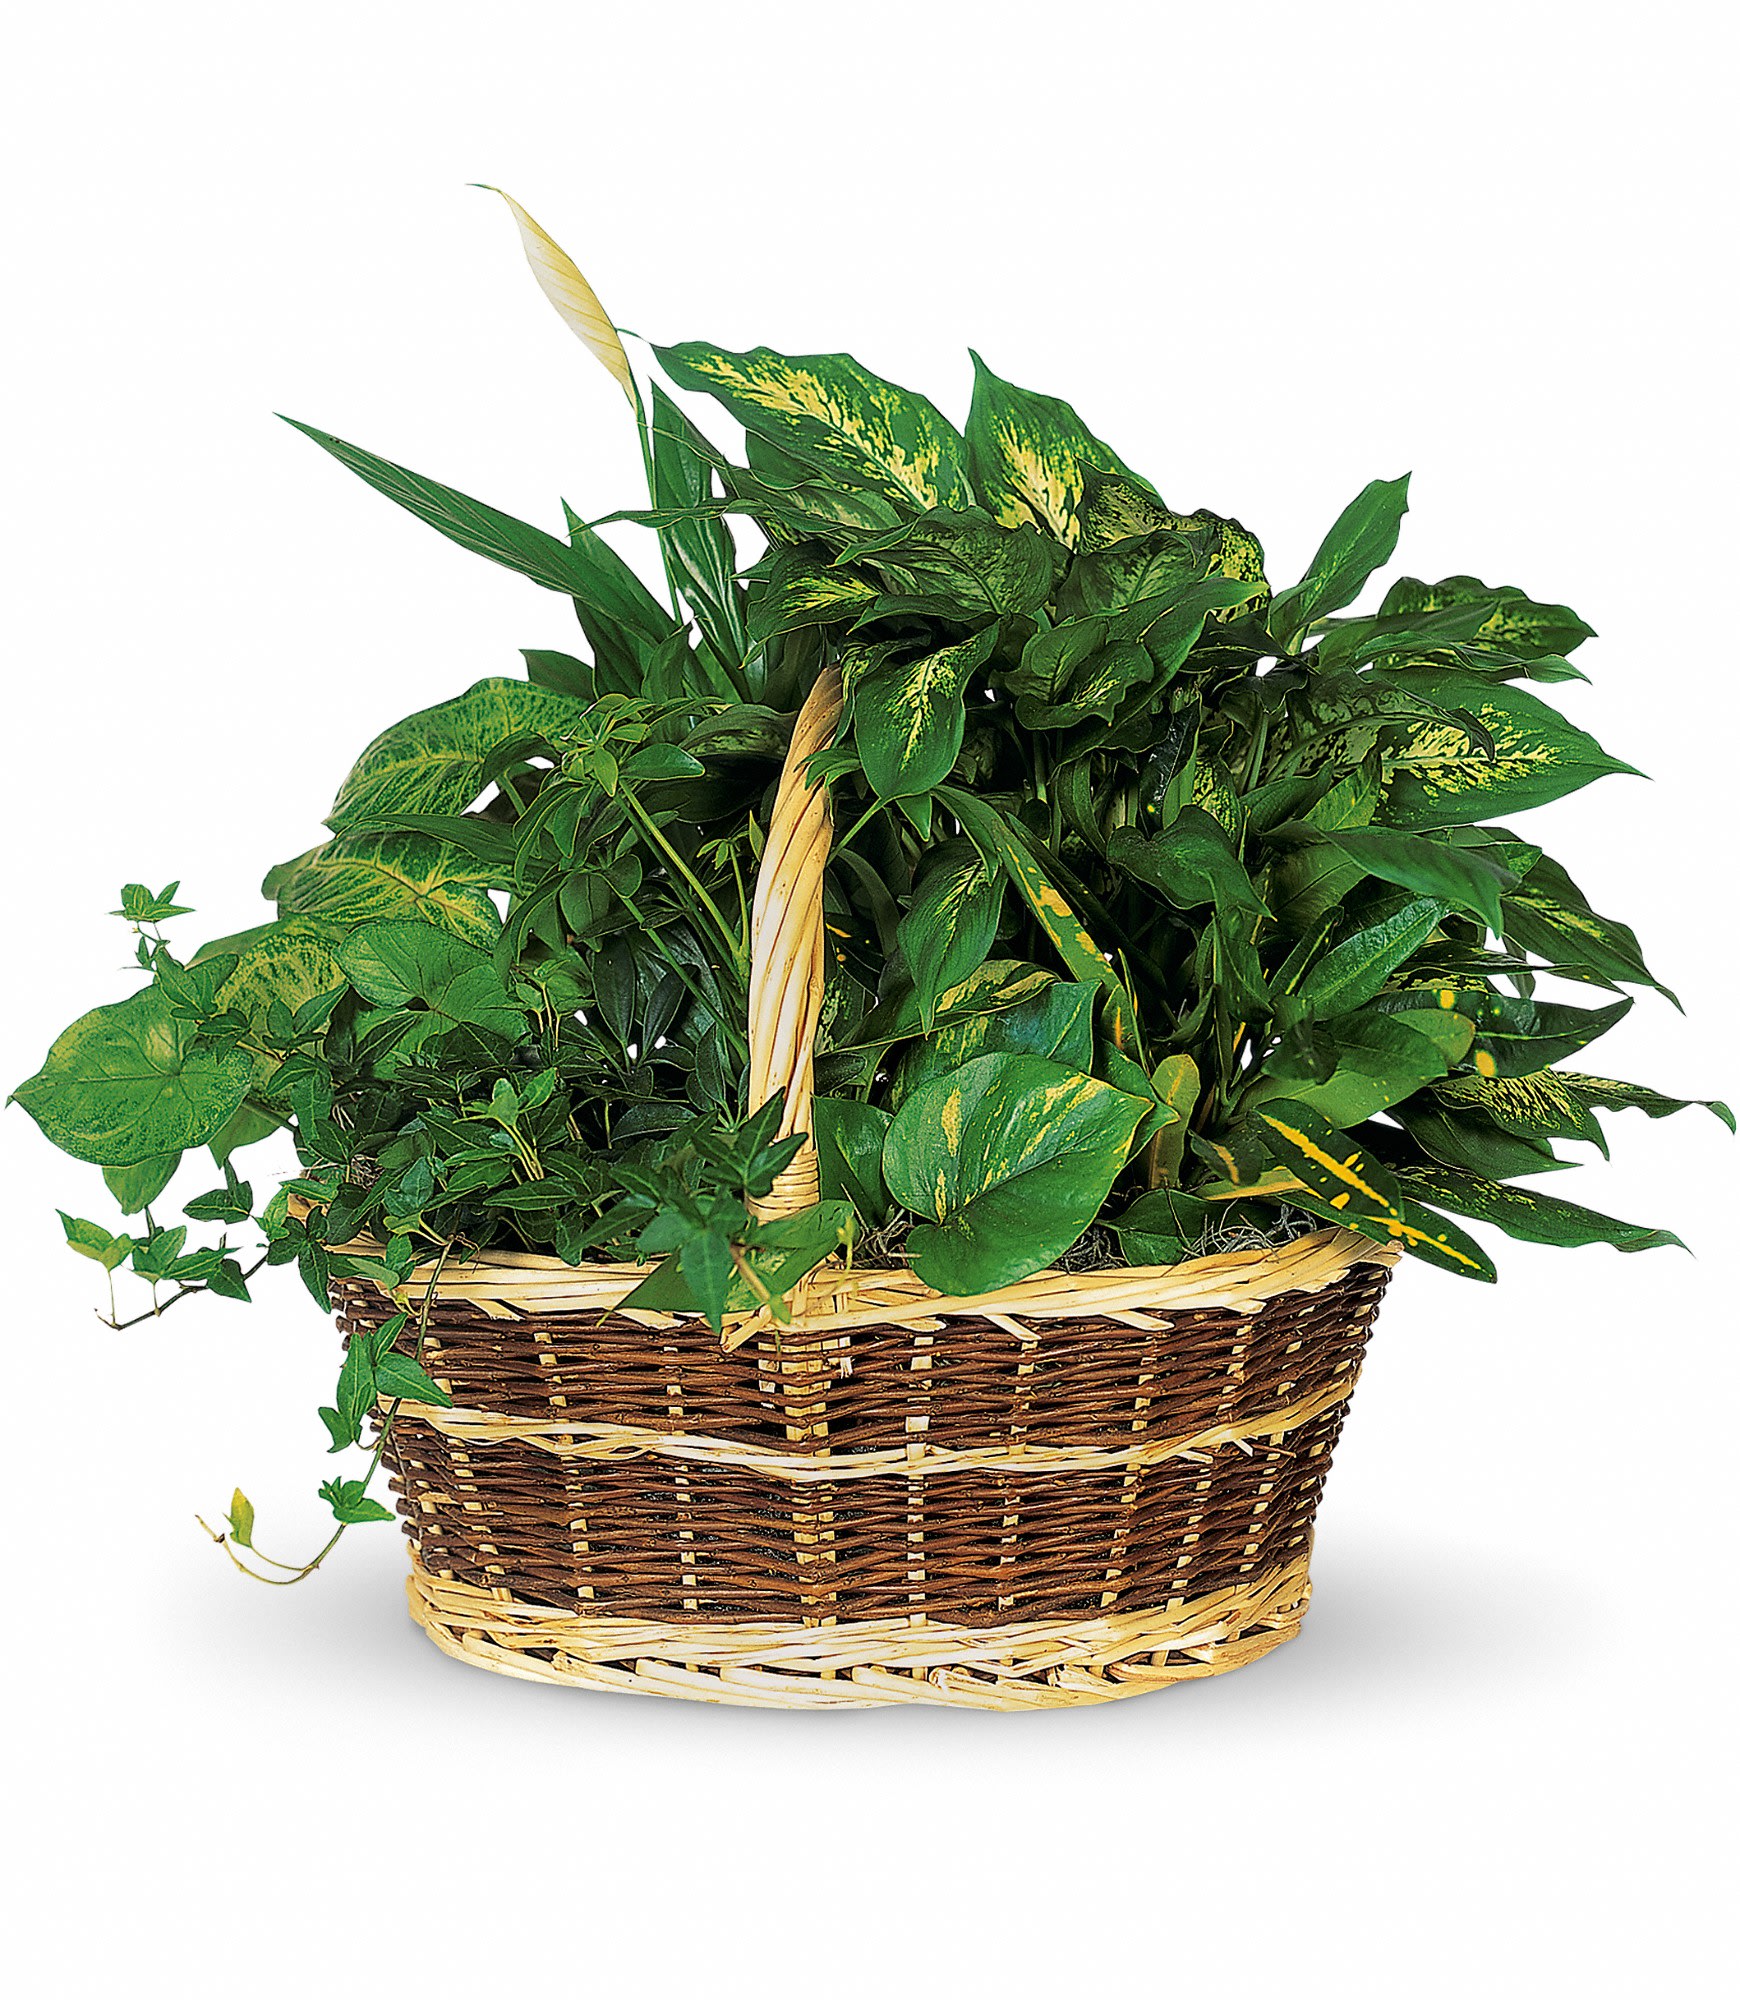 Large Basket Garden - This impressive garden of indoor plants will be a warm welcome to any home or office. And you'll get glowing reviews for sending it. 